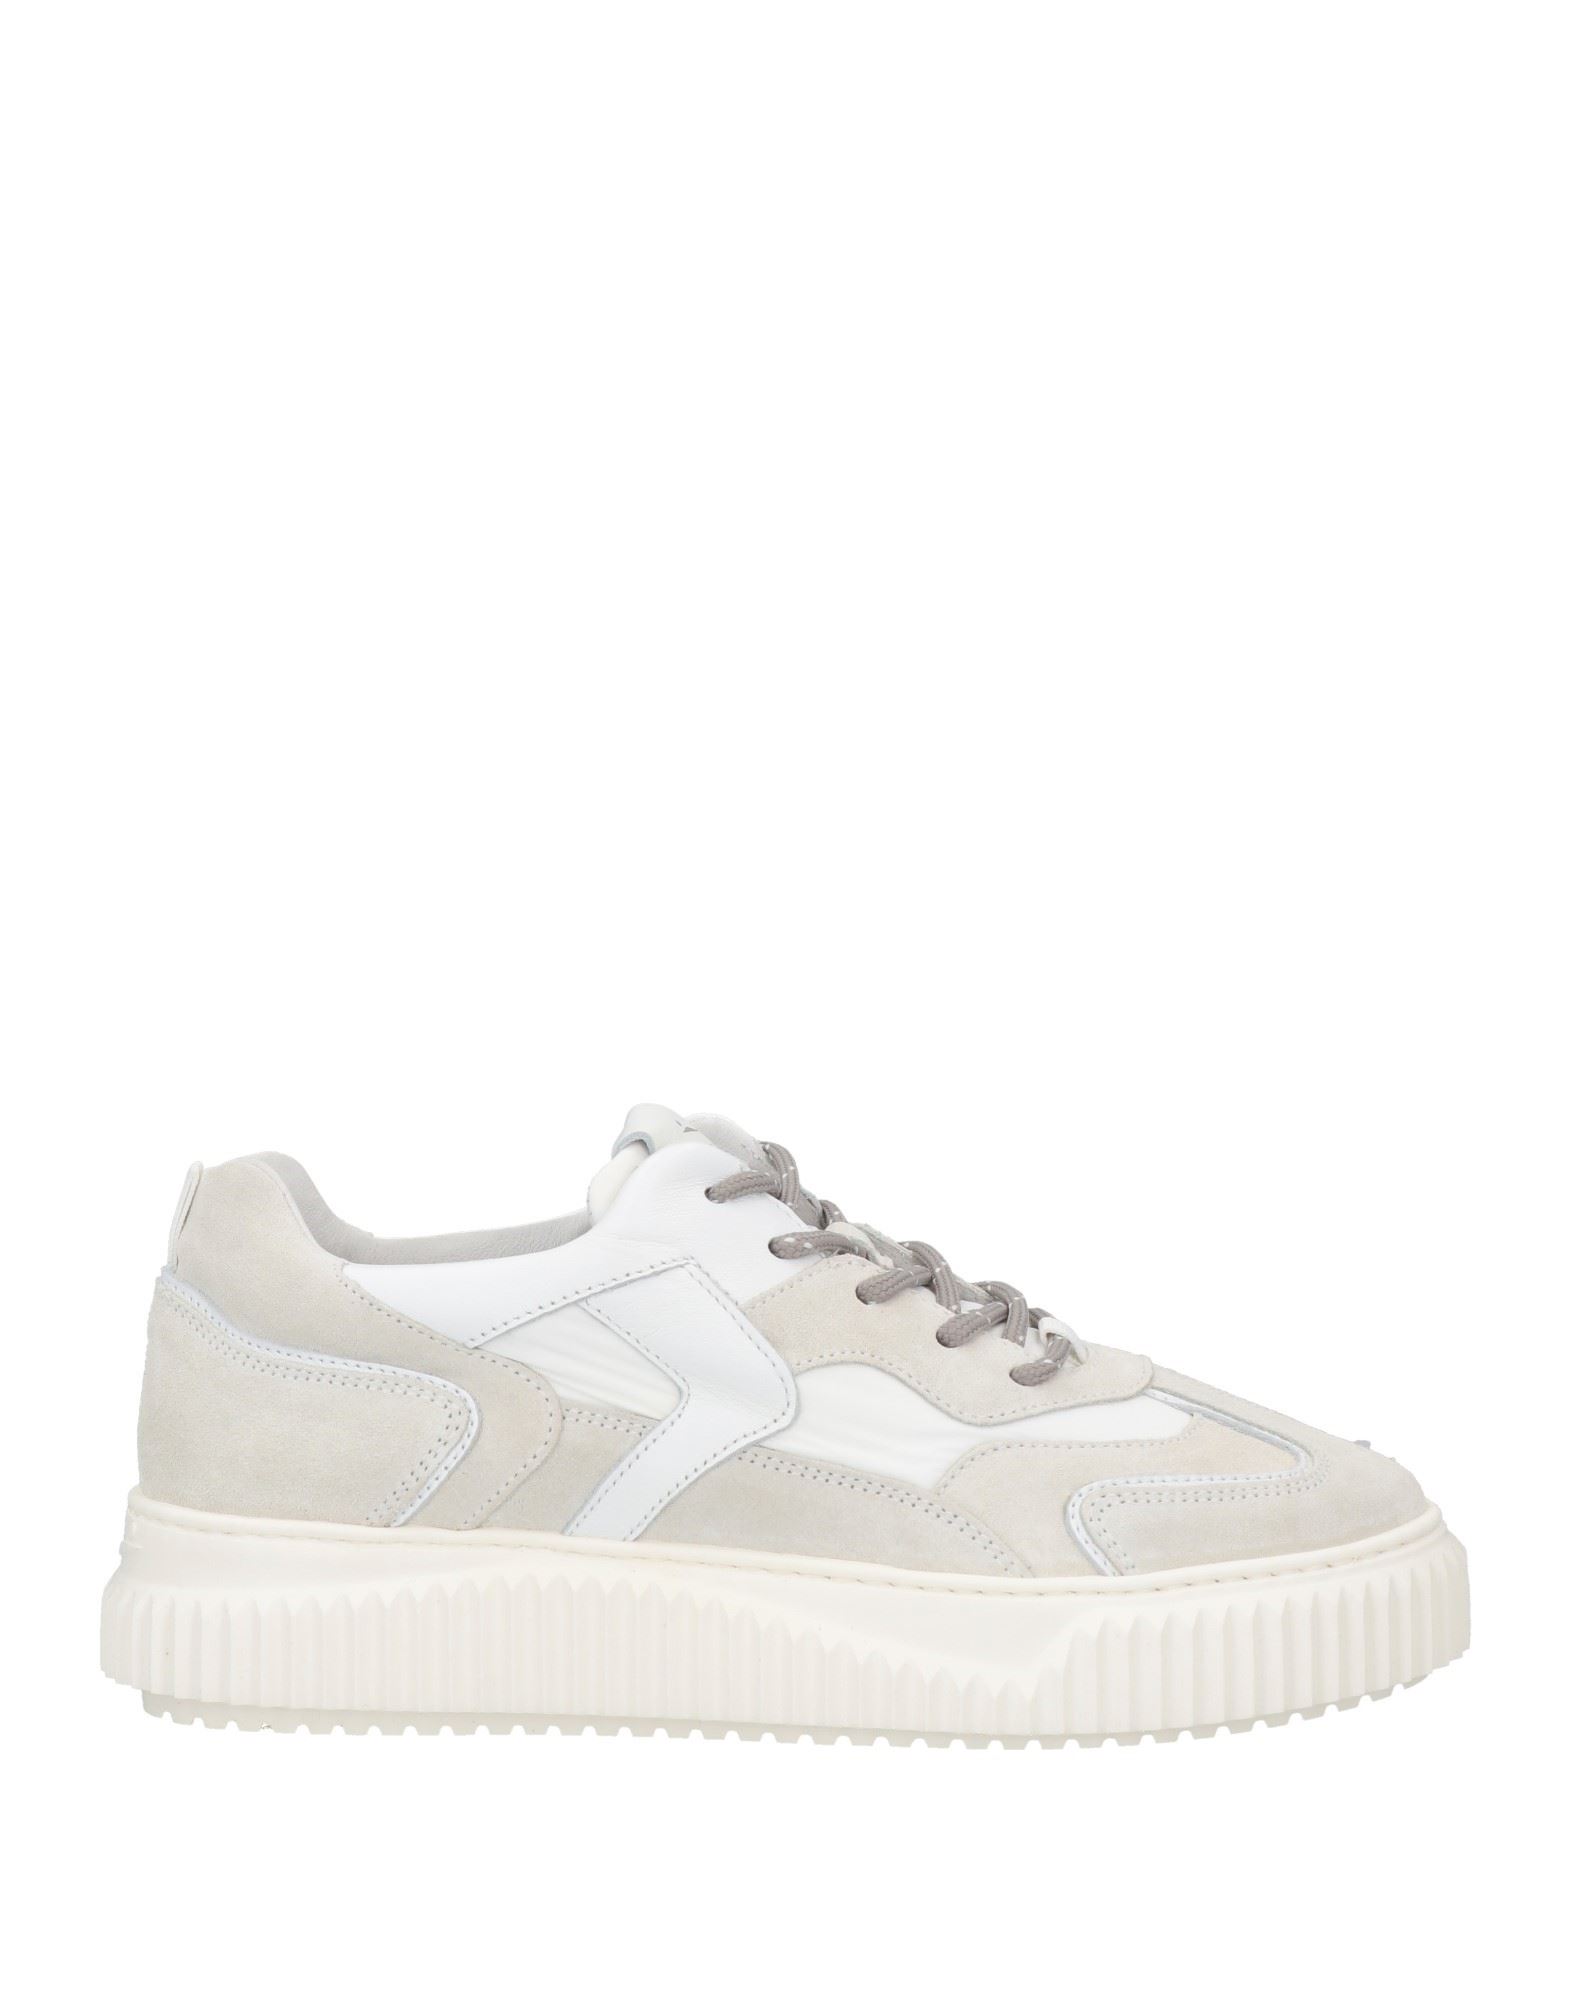 Voile Blanche Sneakers In Grey